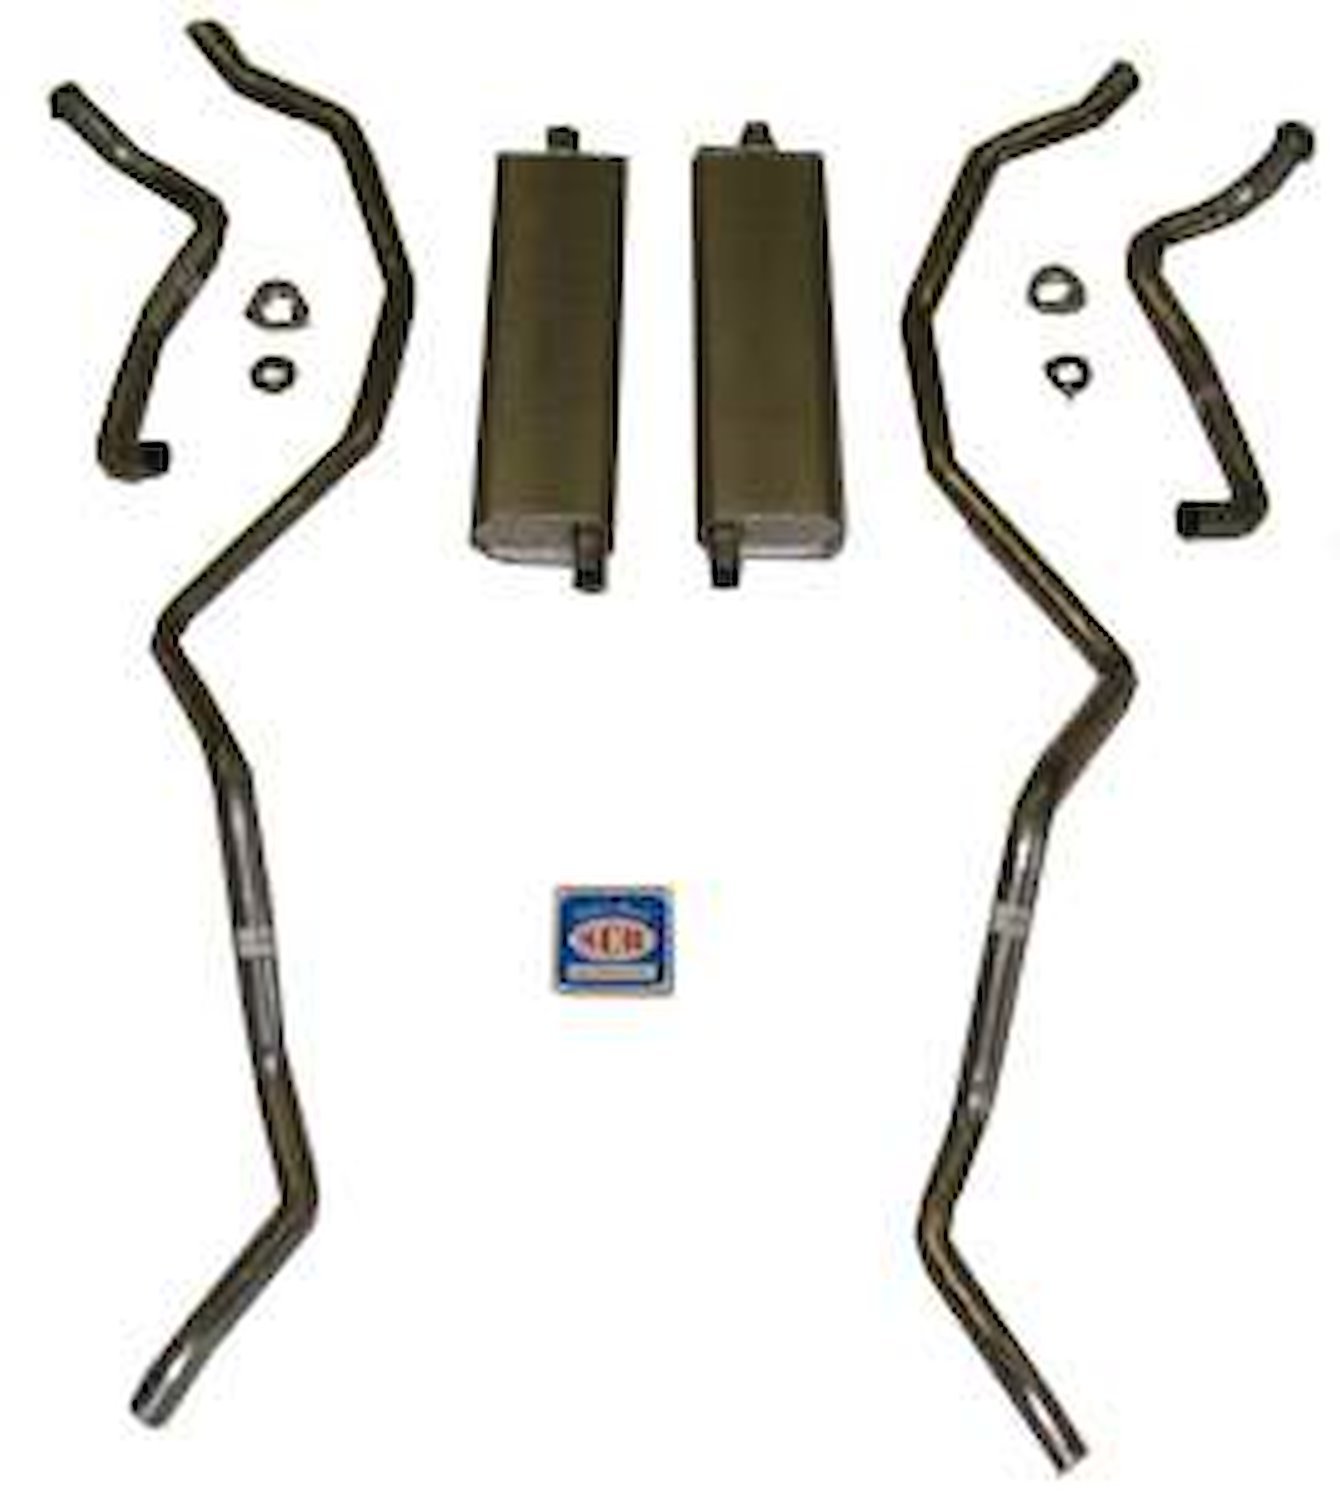 73005 1960-1961 Chevrolet Full-Size 8-cyl 348 Dual Exhaust System